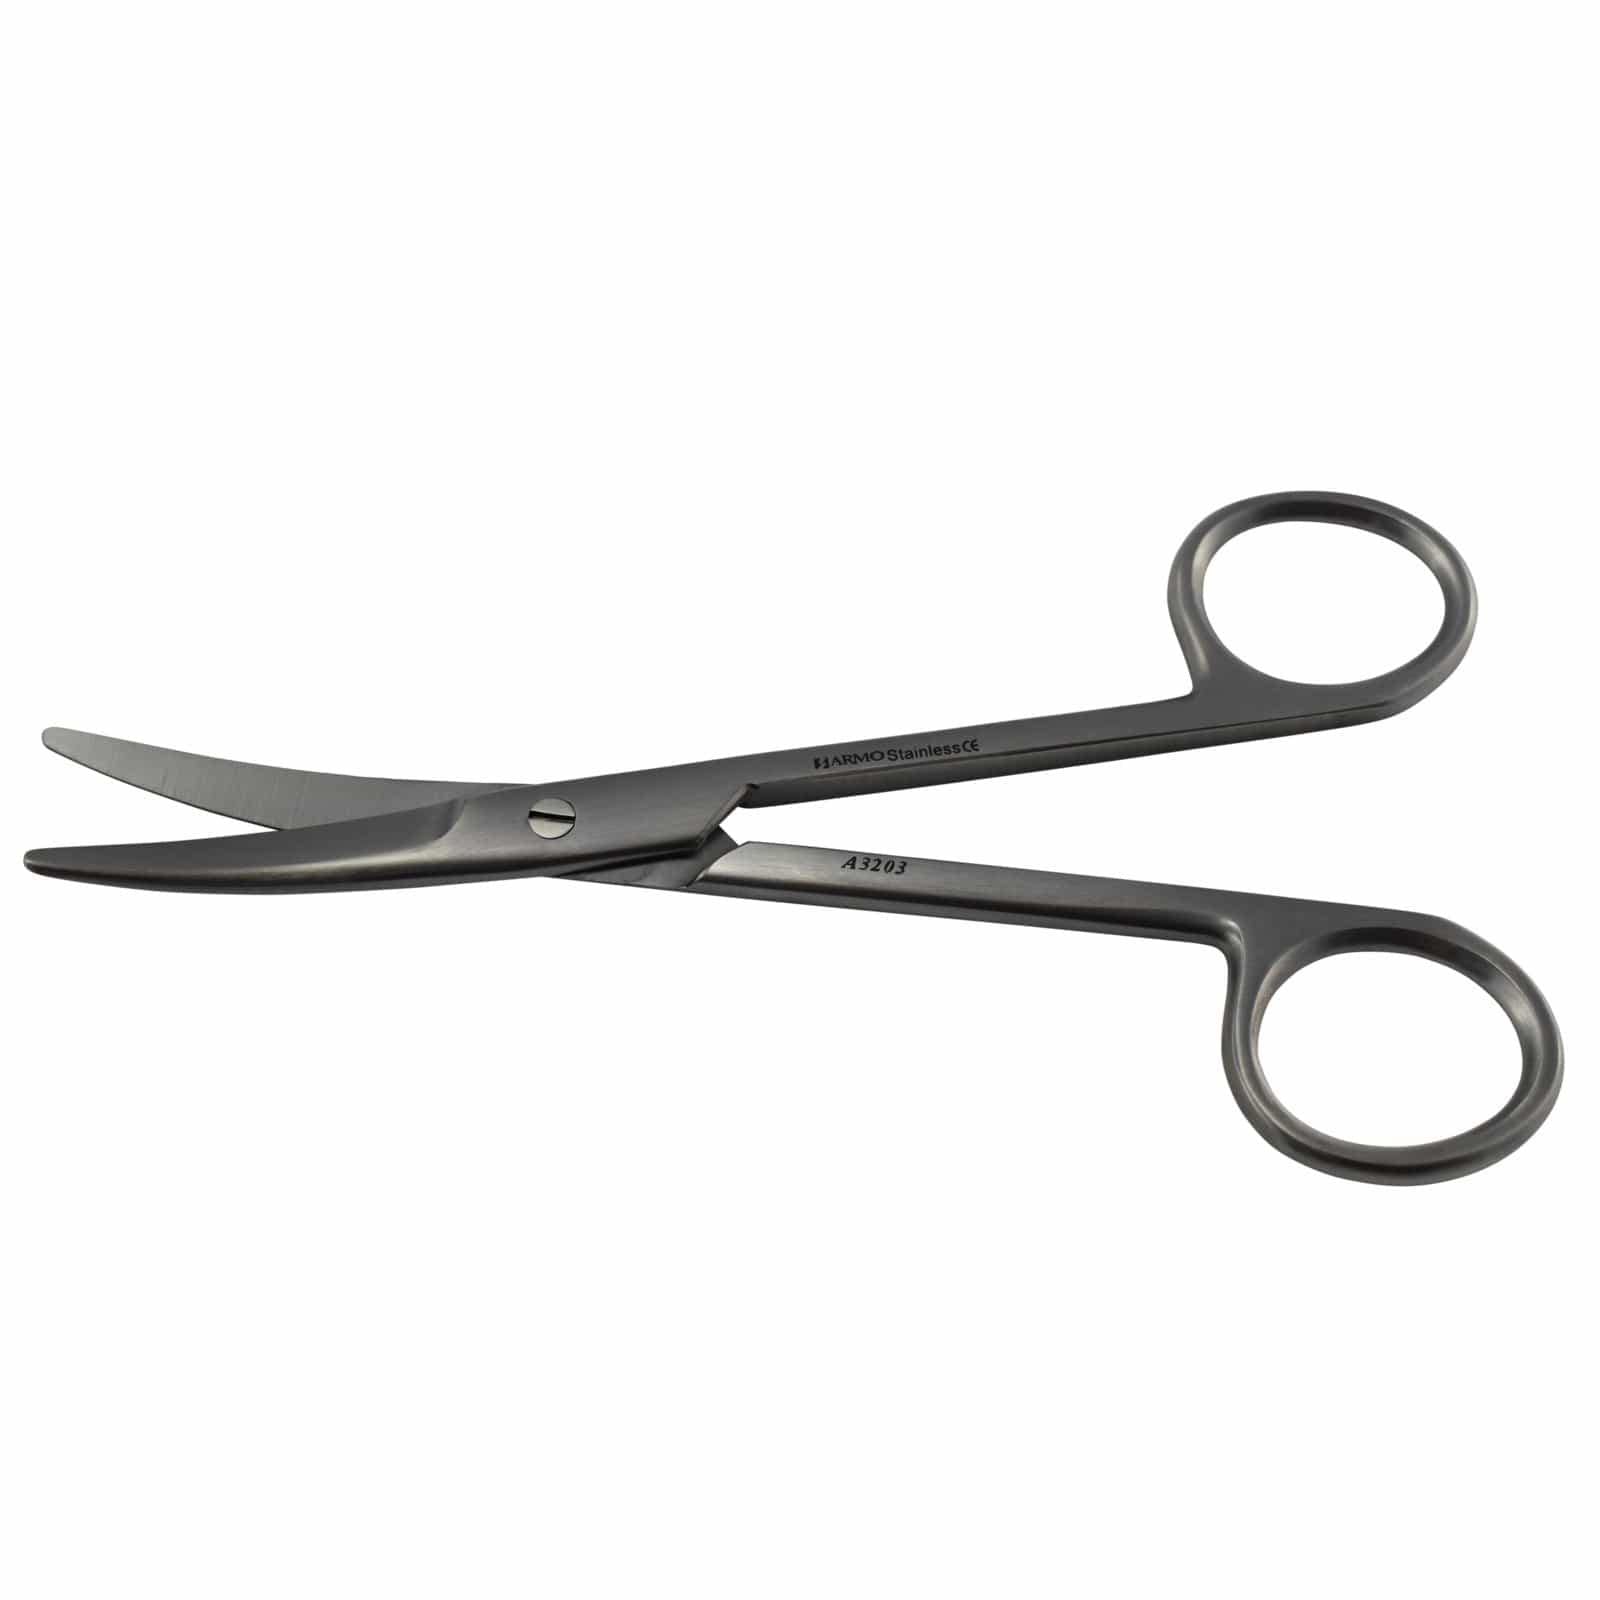 Armo Surgical Instruments 14cm / Curved / Standard Armo Mayo Scissors